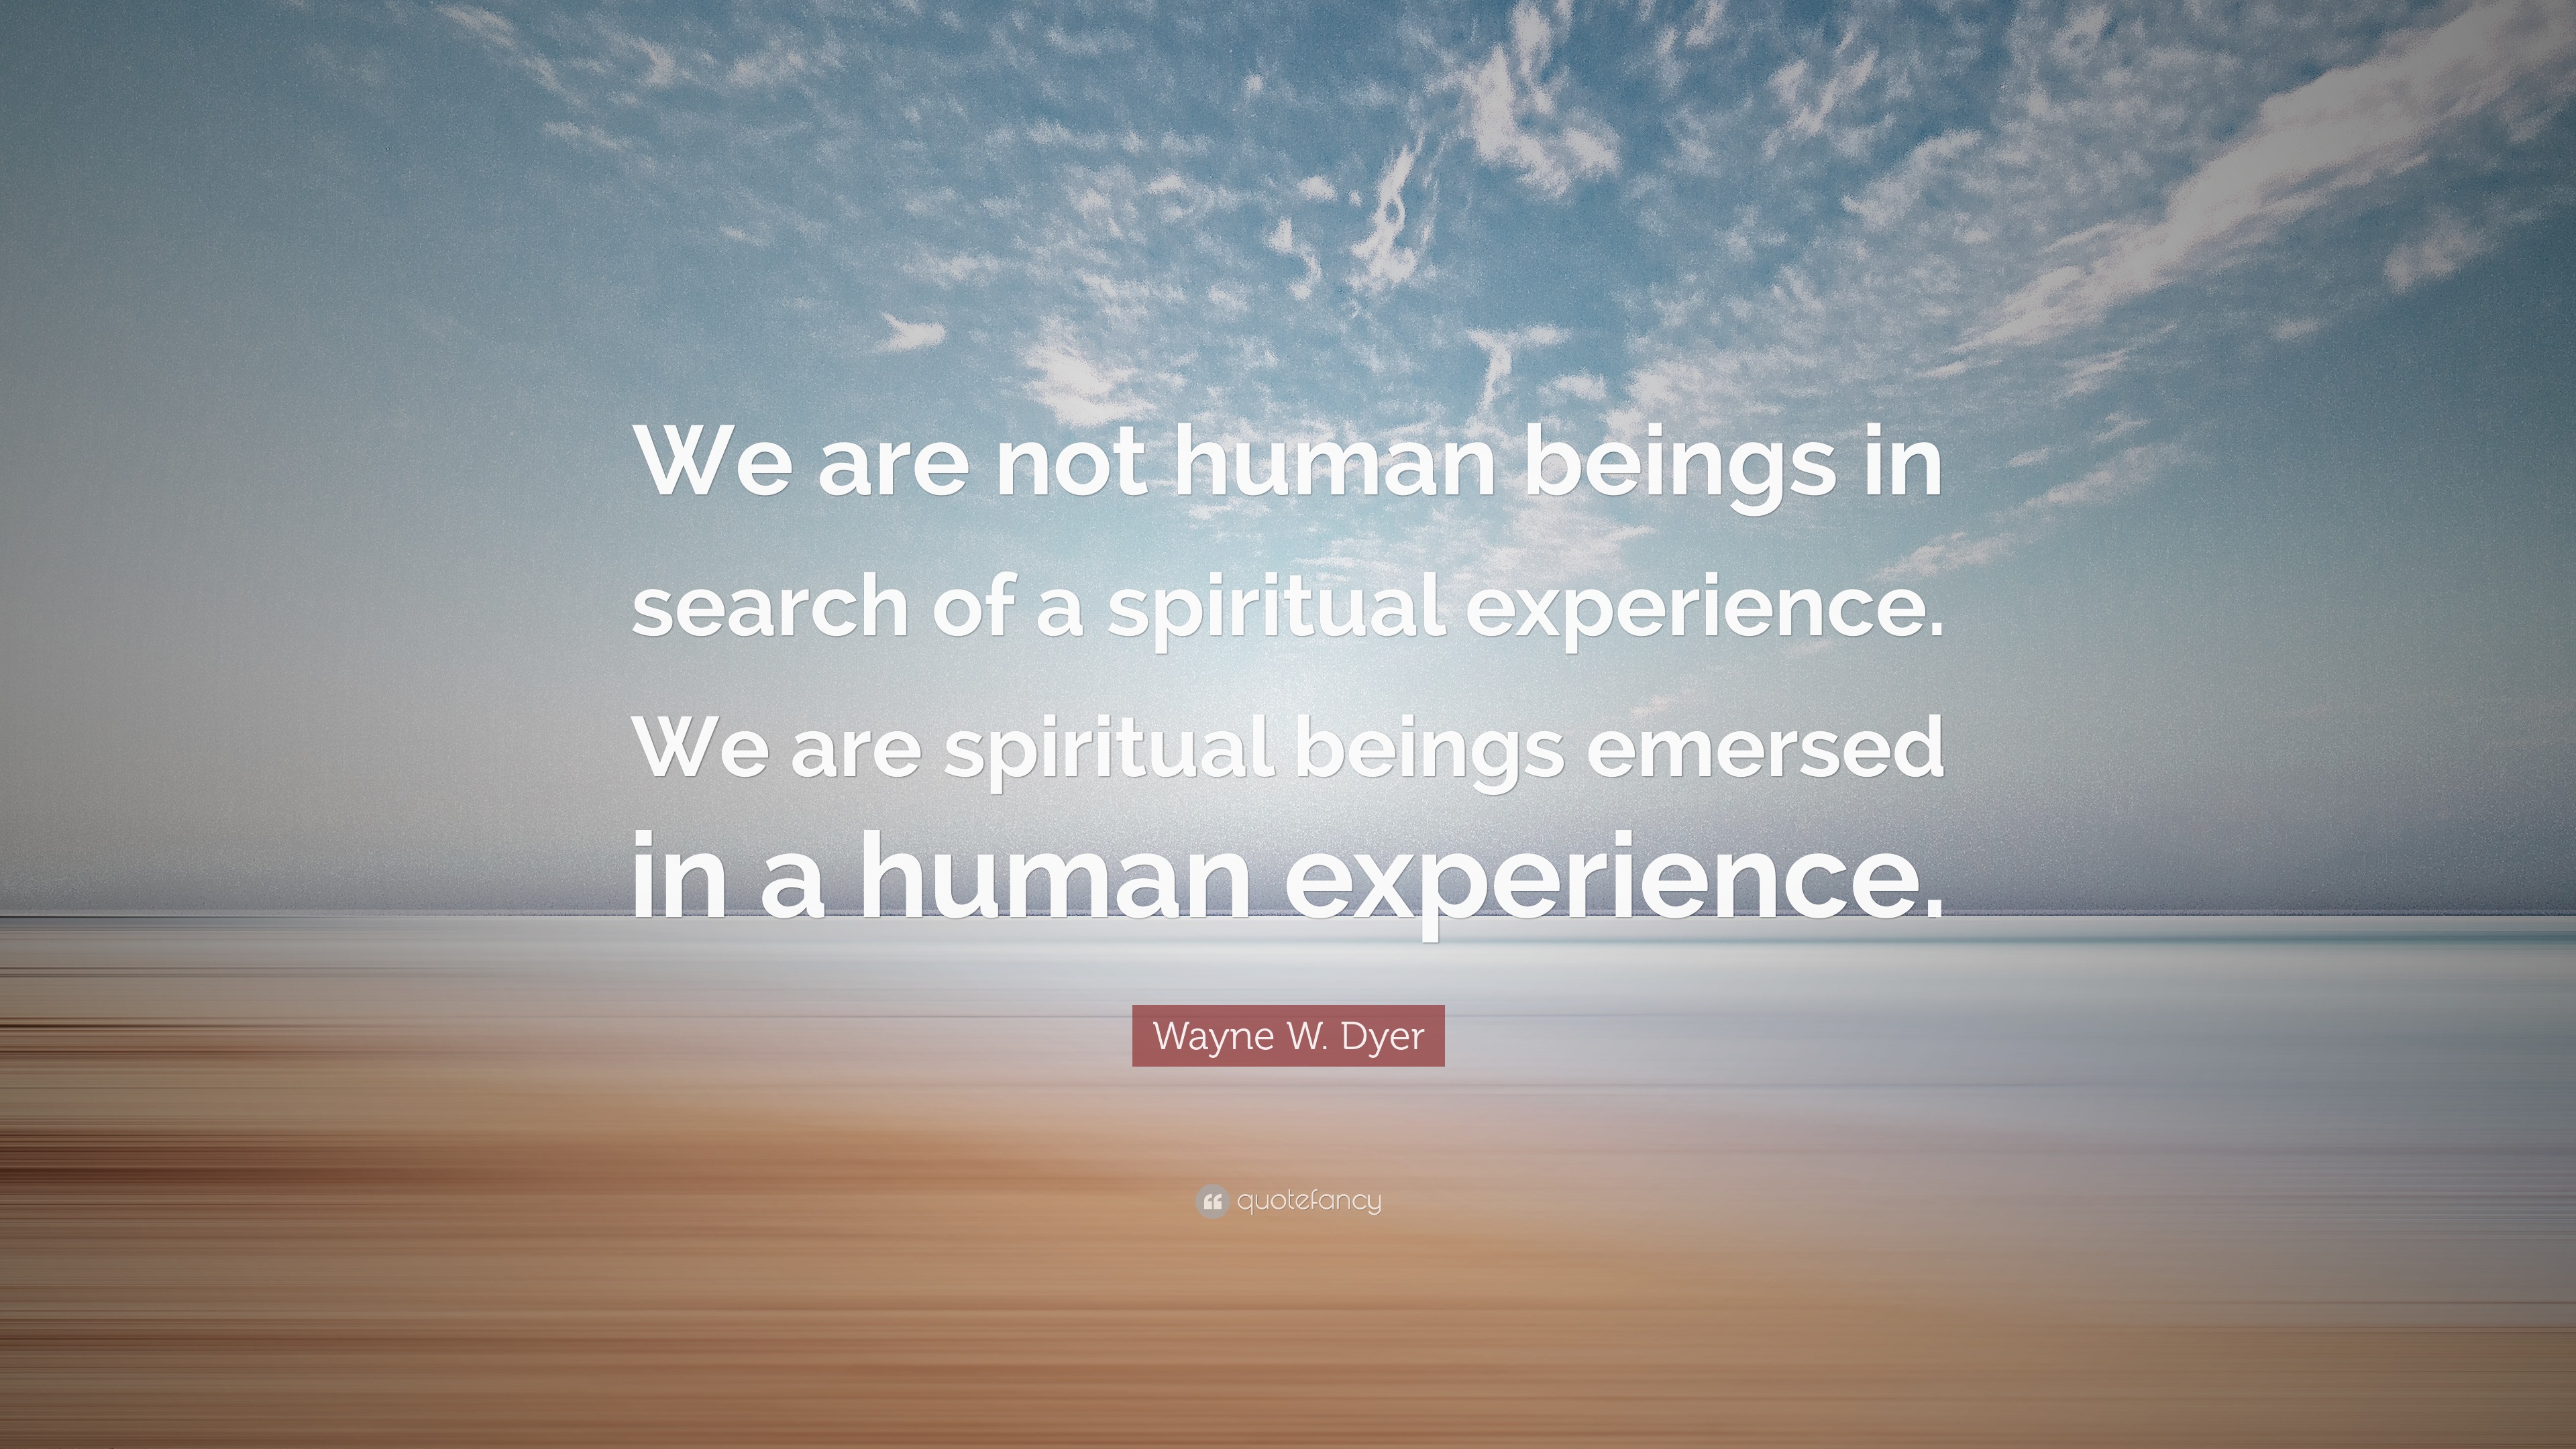 wayne dyer we are not human beings